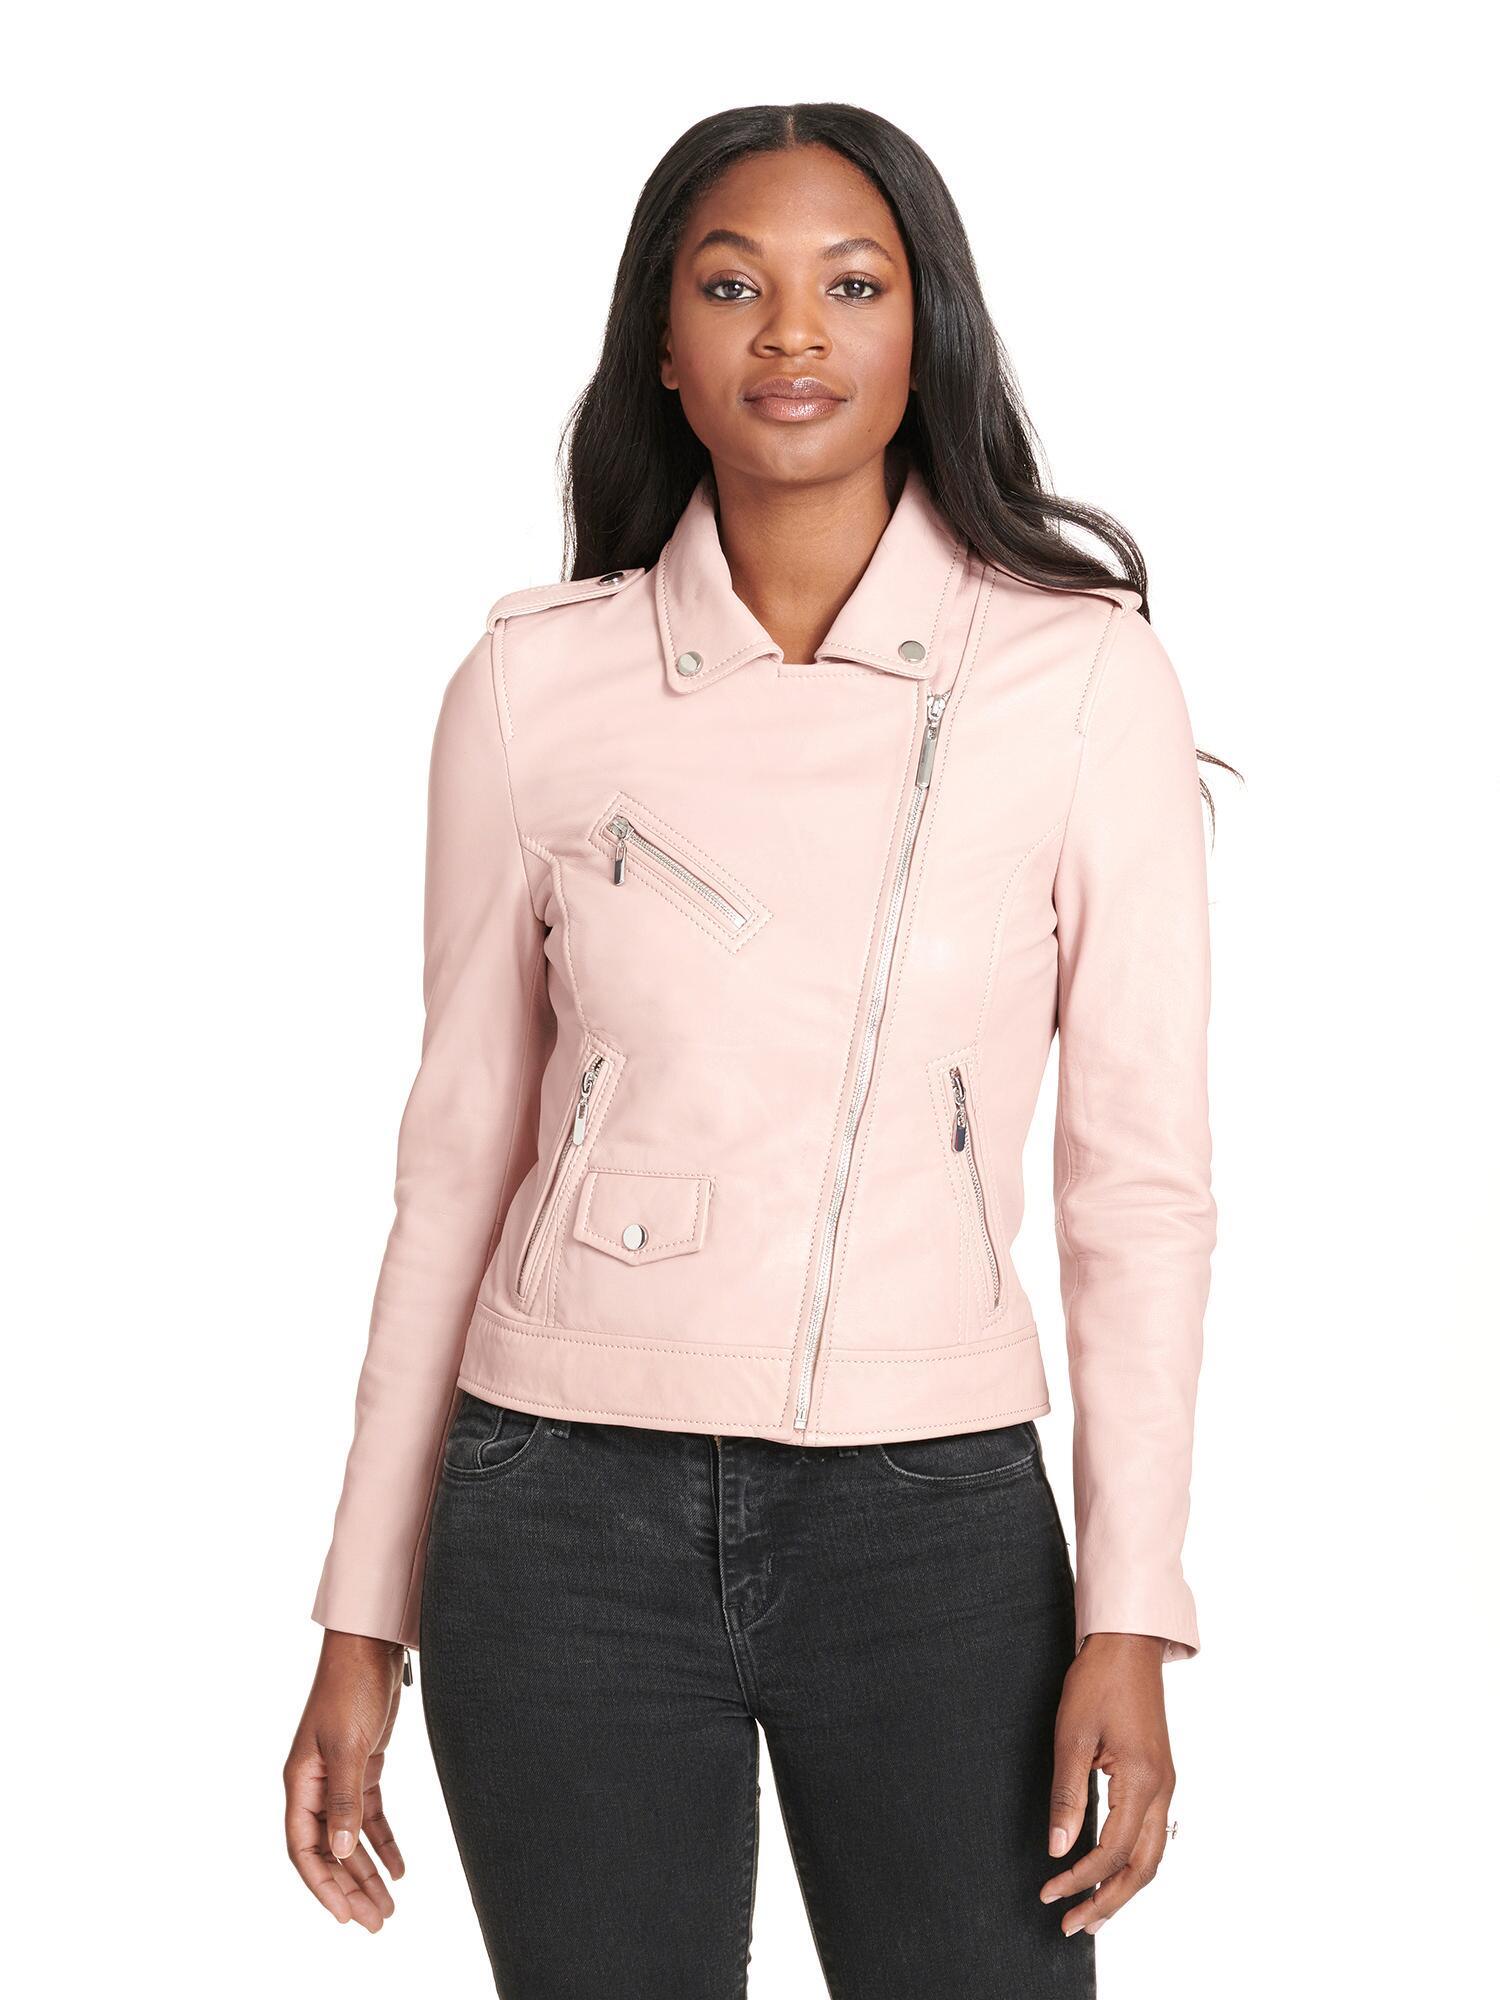 Wilsons Leather Claire Asymmetrical Leather Jacket in Pink | Lyst